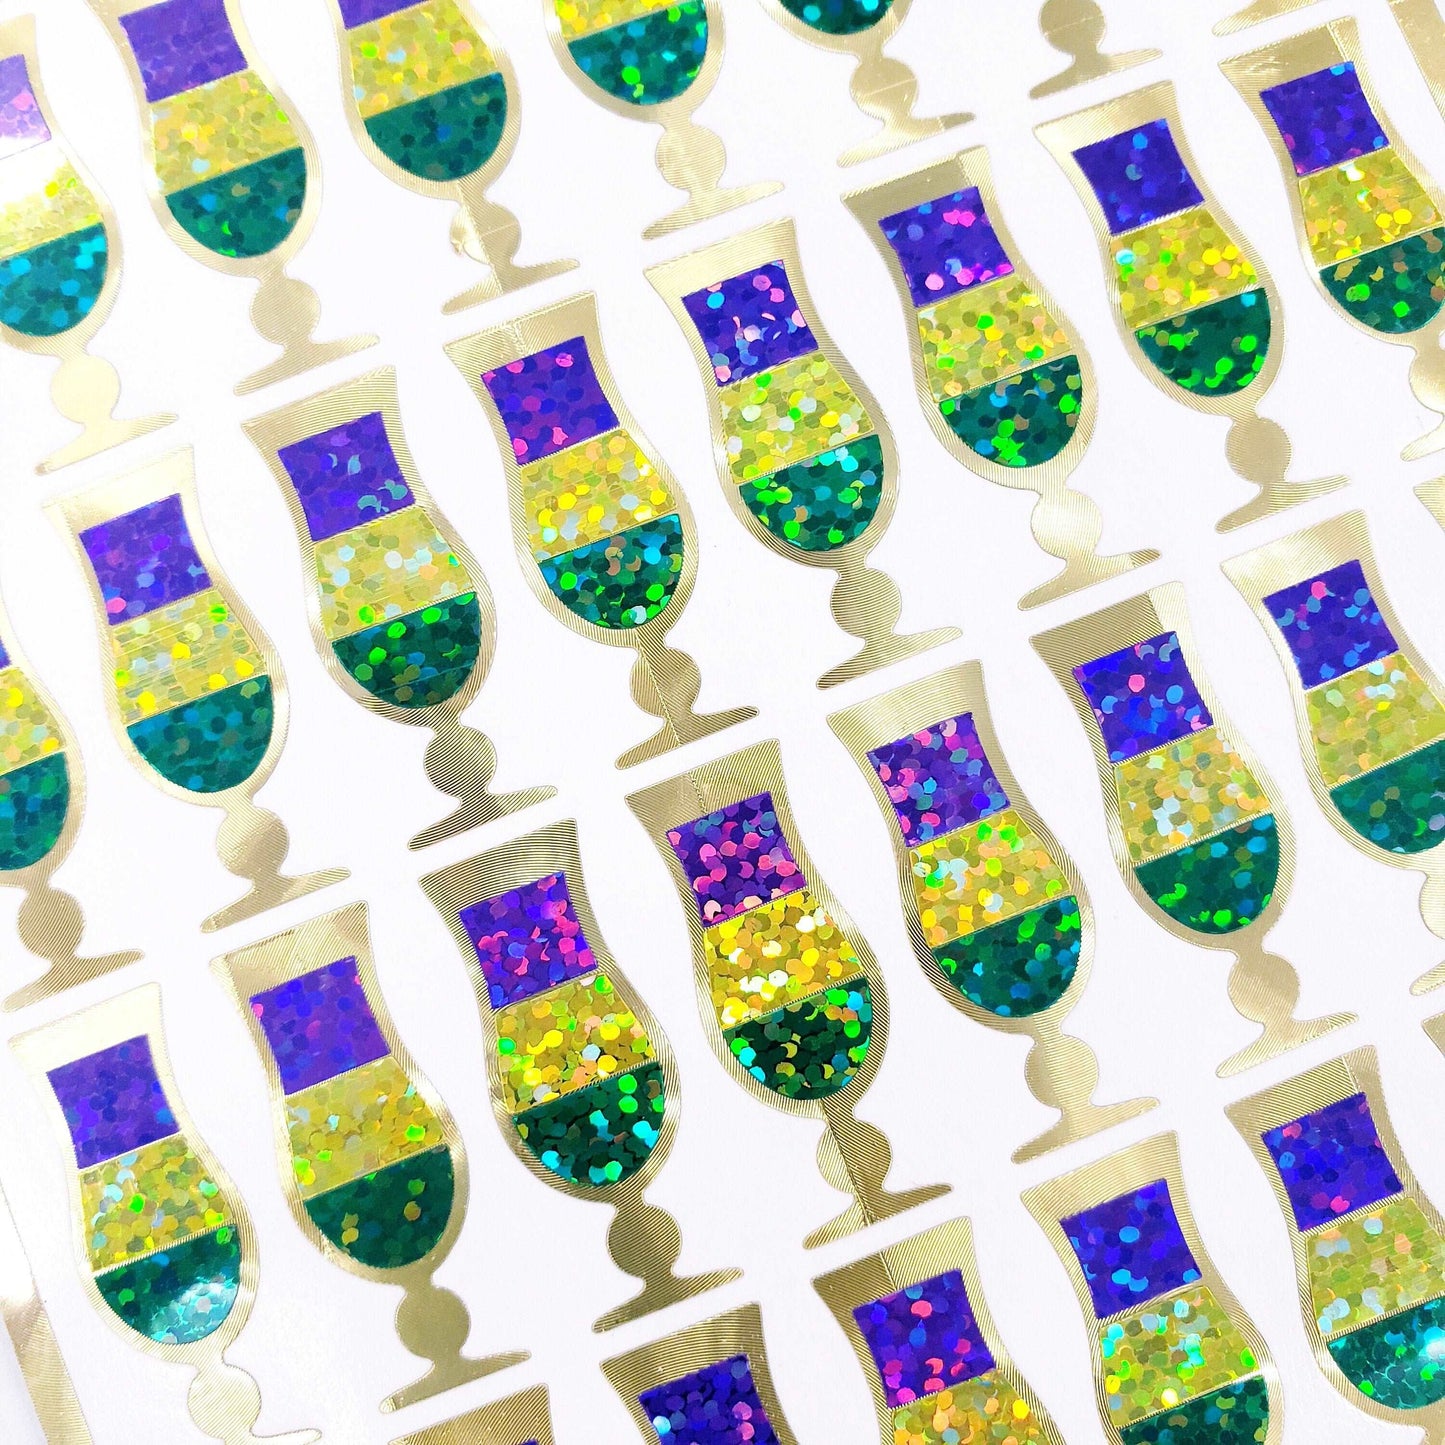 Mardi Gras Stickers, set of 40 Purple, Green, and Gold Hurricane Glass Decals for Fat Tuesday, Louisiana Inspired Drinks, Ash Wednesday